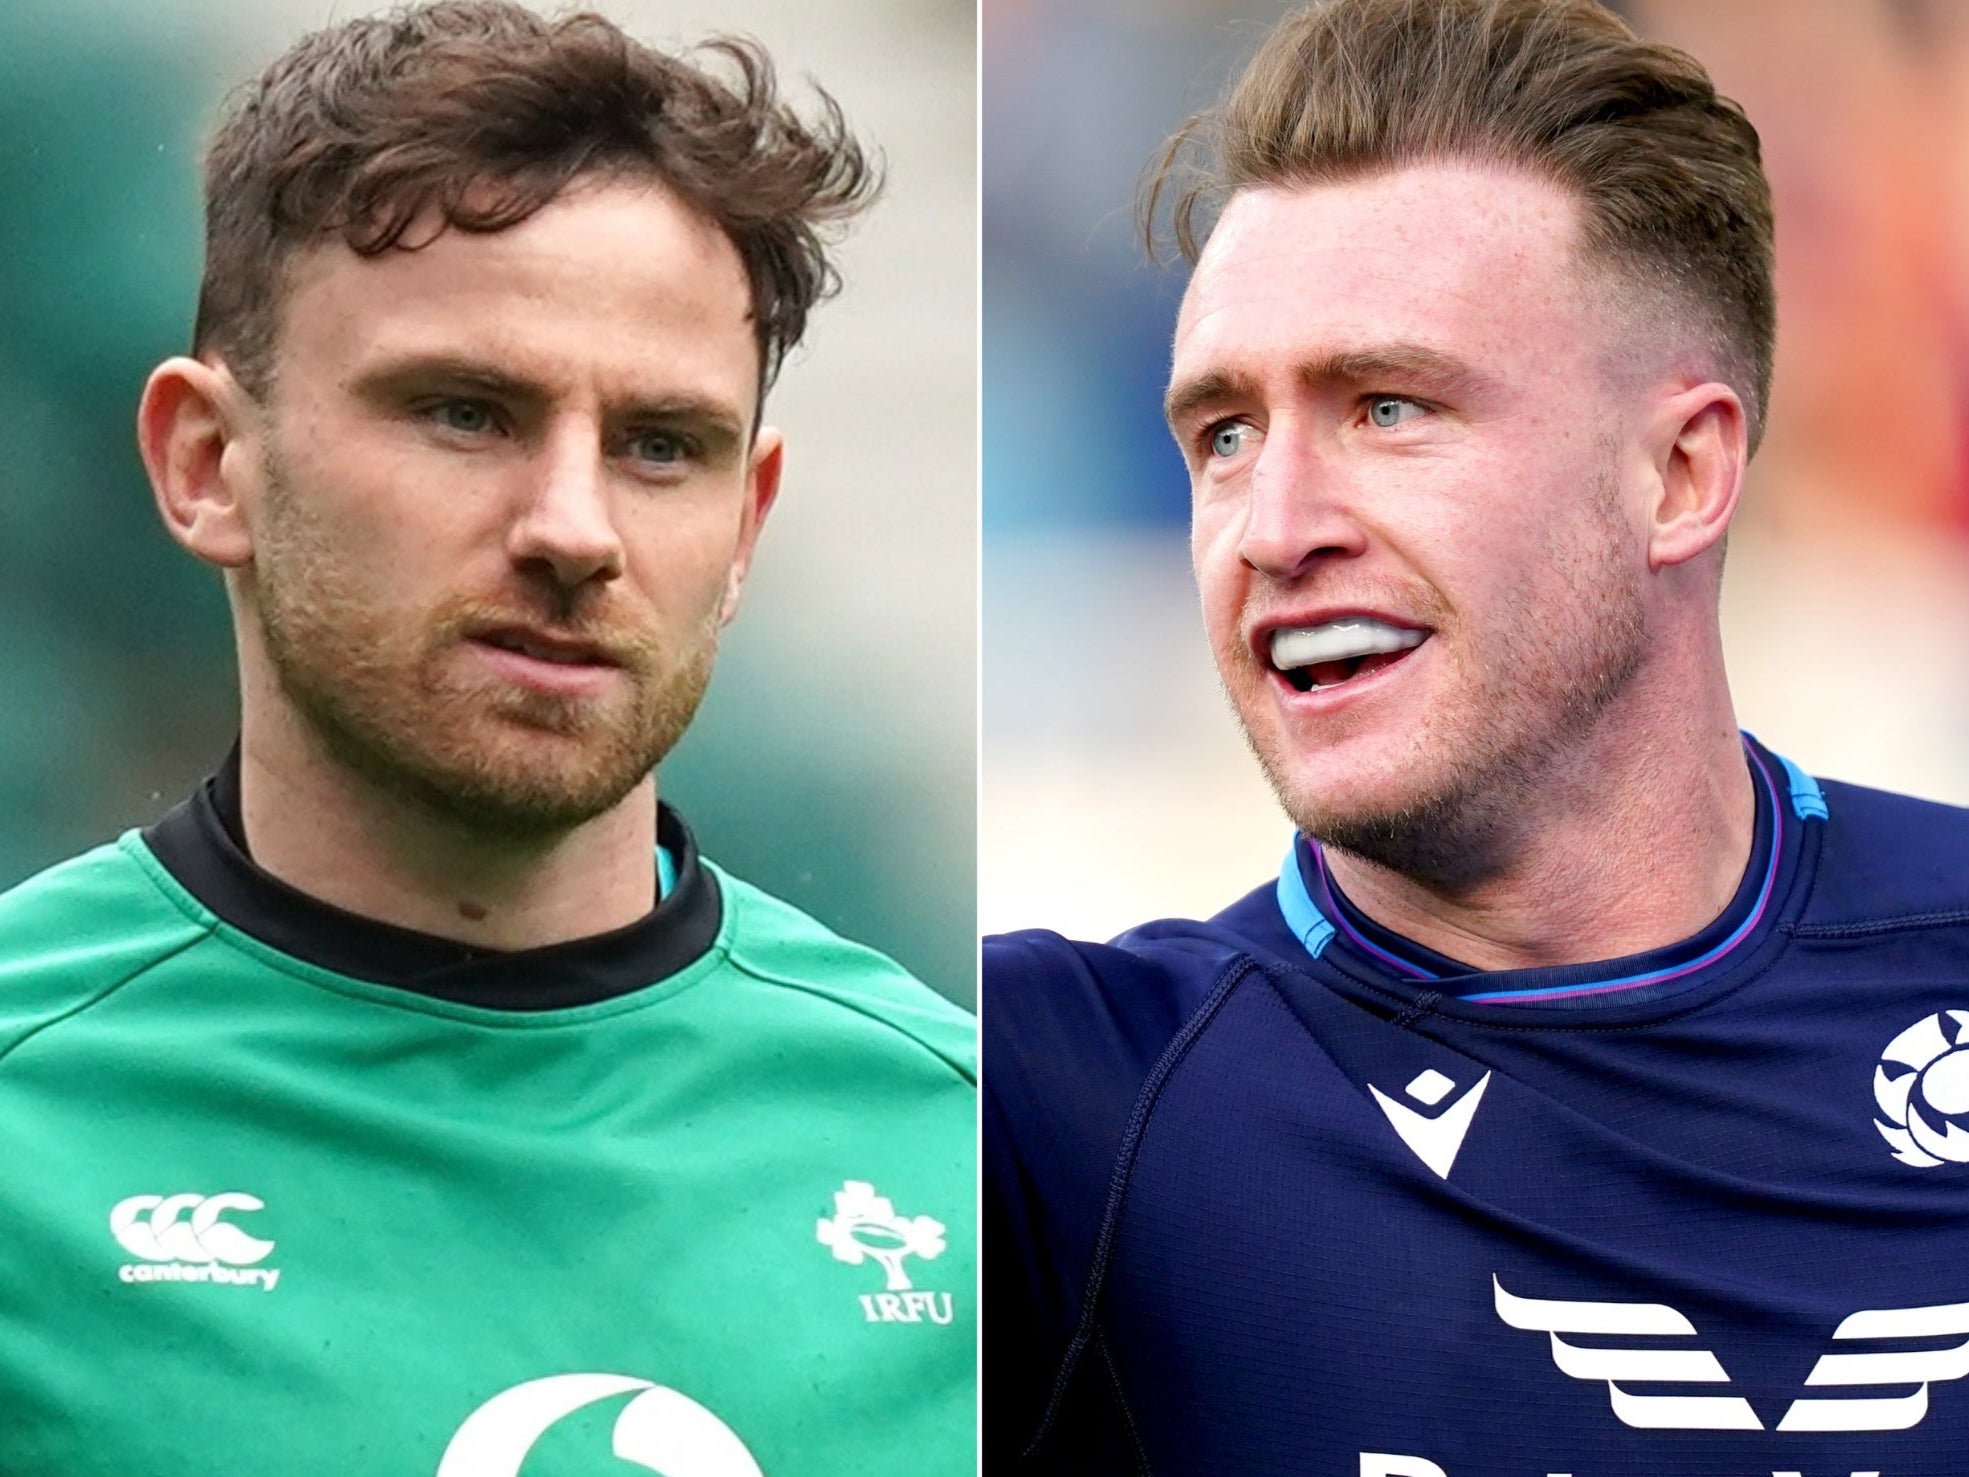 The fullback battle between Hugo Keenan and Stuart Hogg could be a key factor in deciding Ireland’s clash with Scotland in Dublin